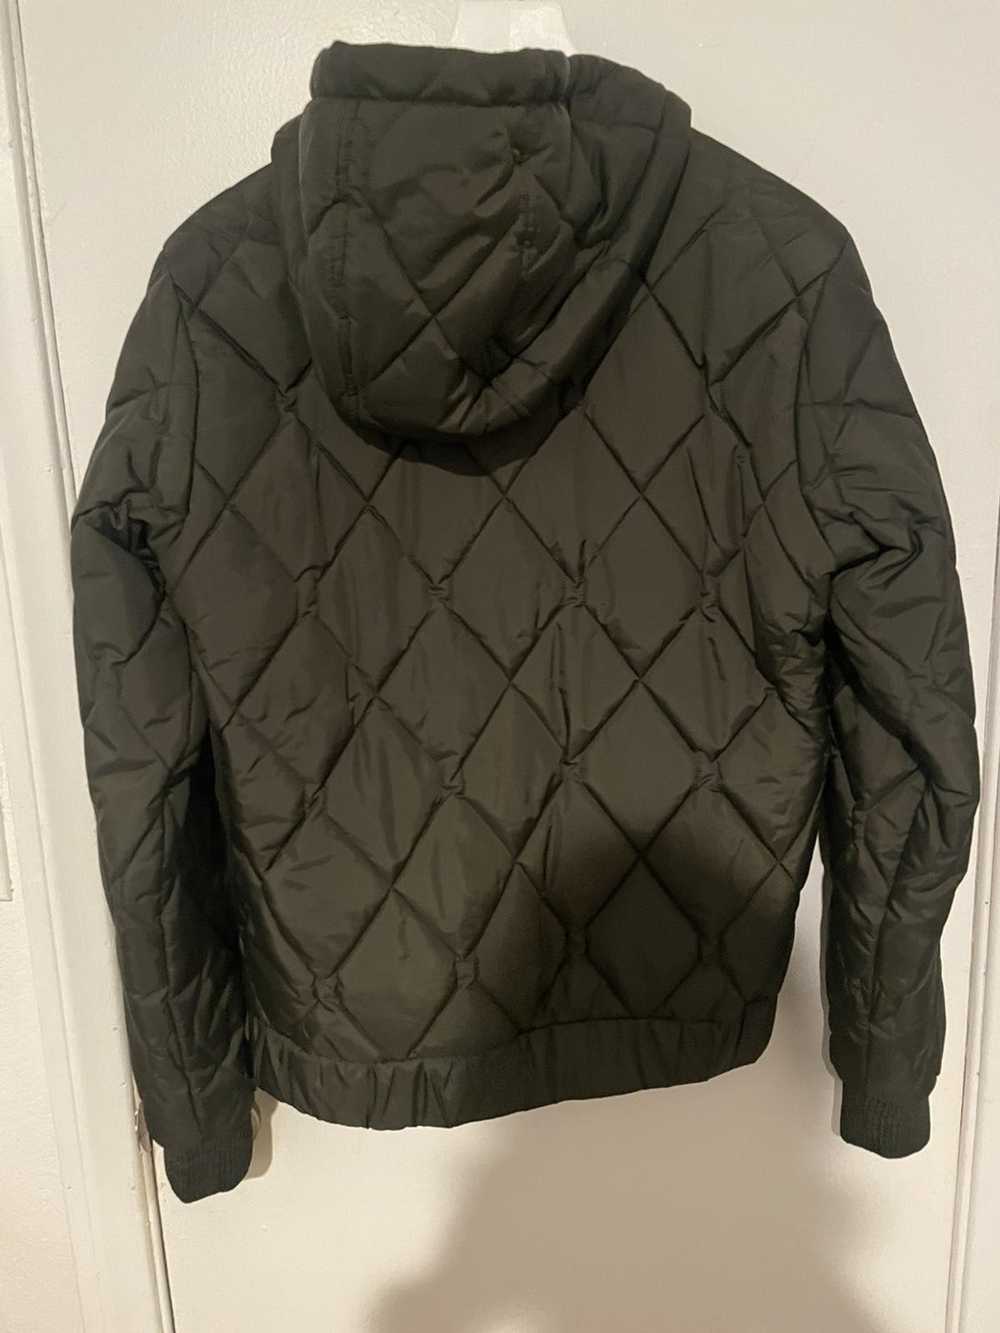 G Star Raw G-Star quilted jacket - image 2